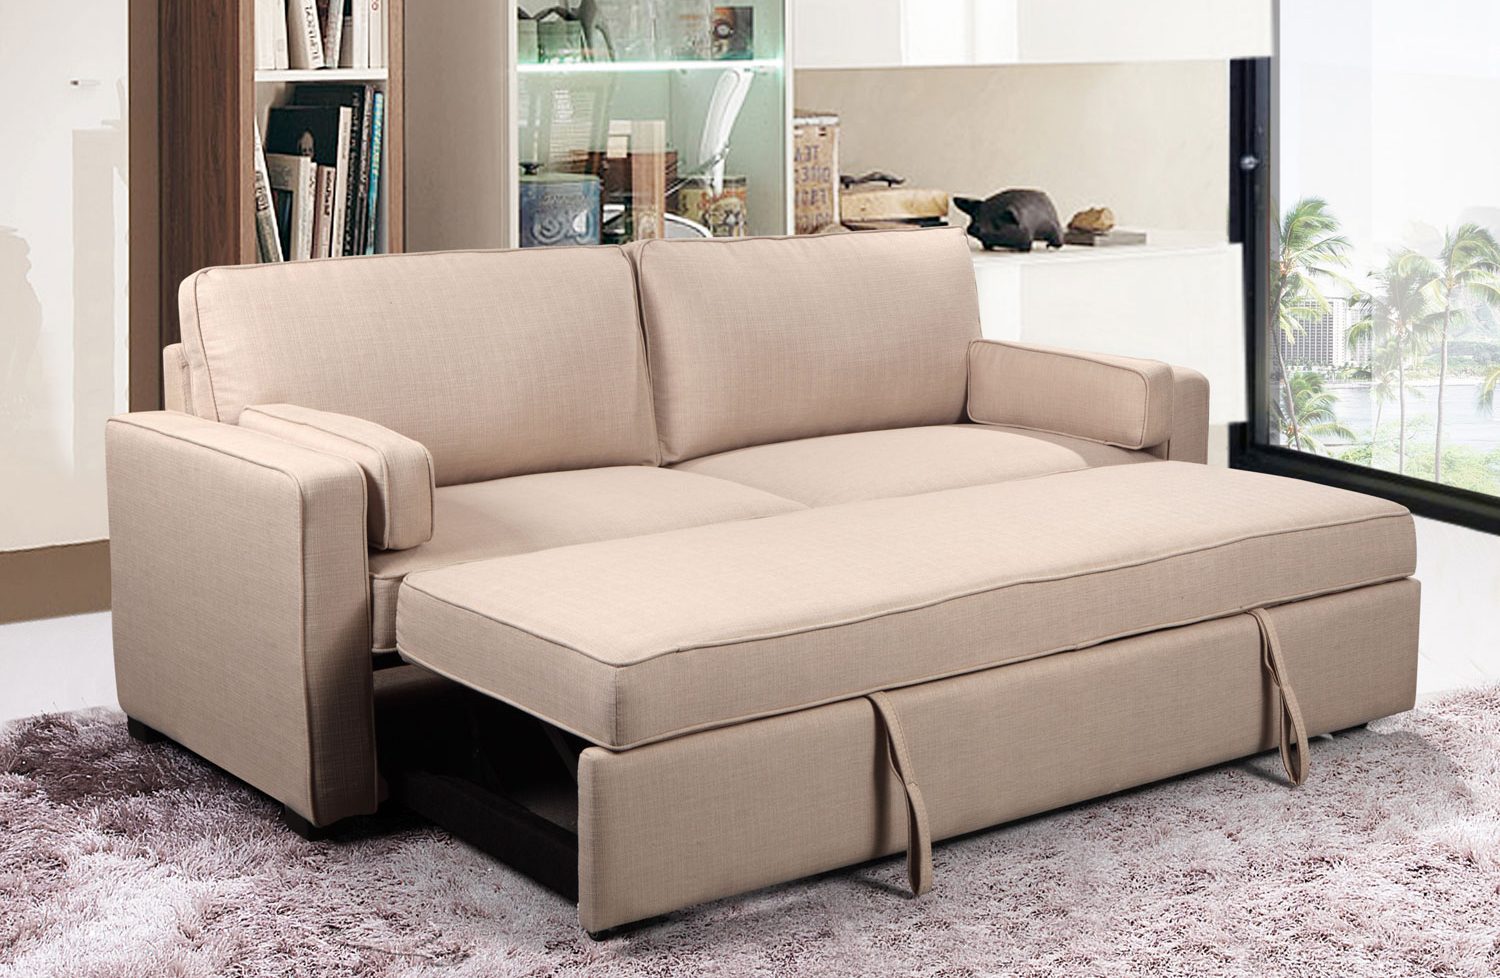 Sofa bed buying guide | Best Buy Blog